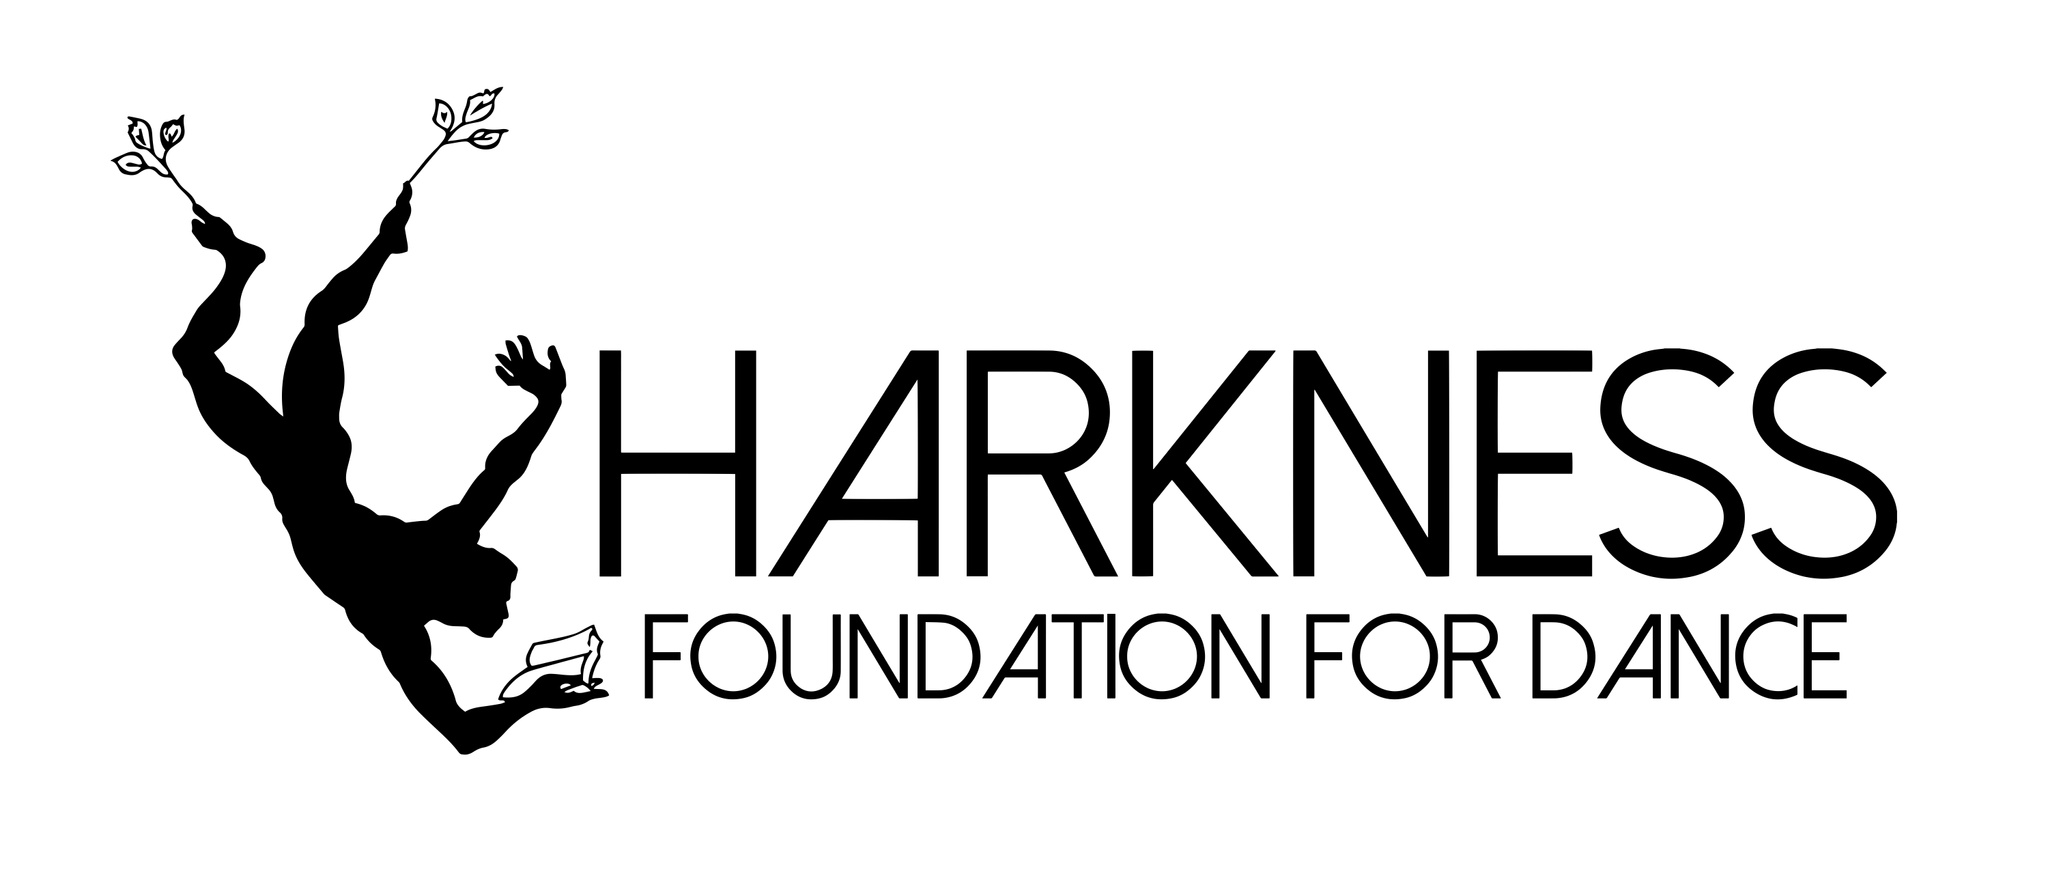 The Harkness Foundation logo